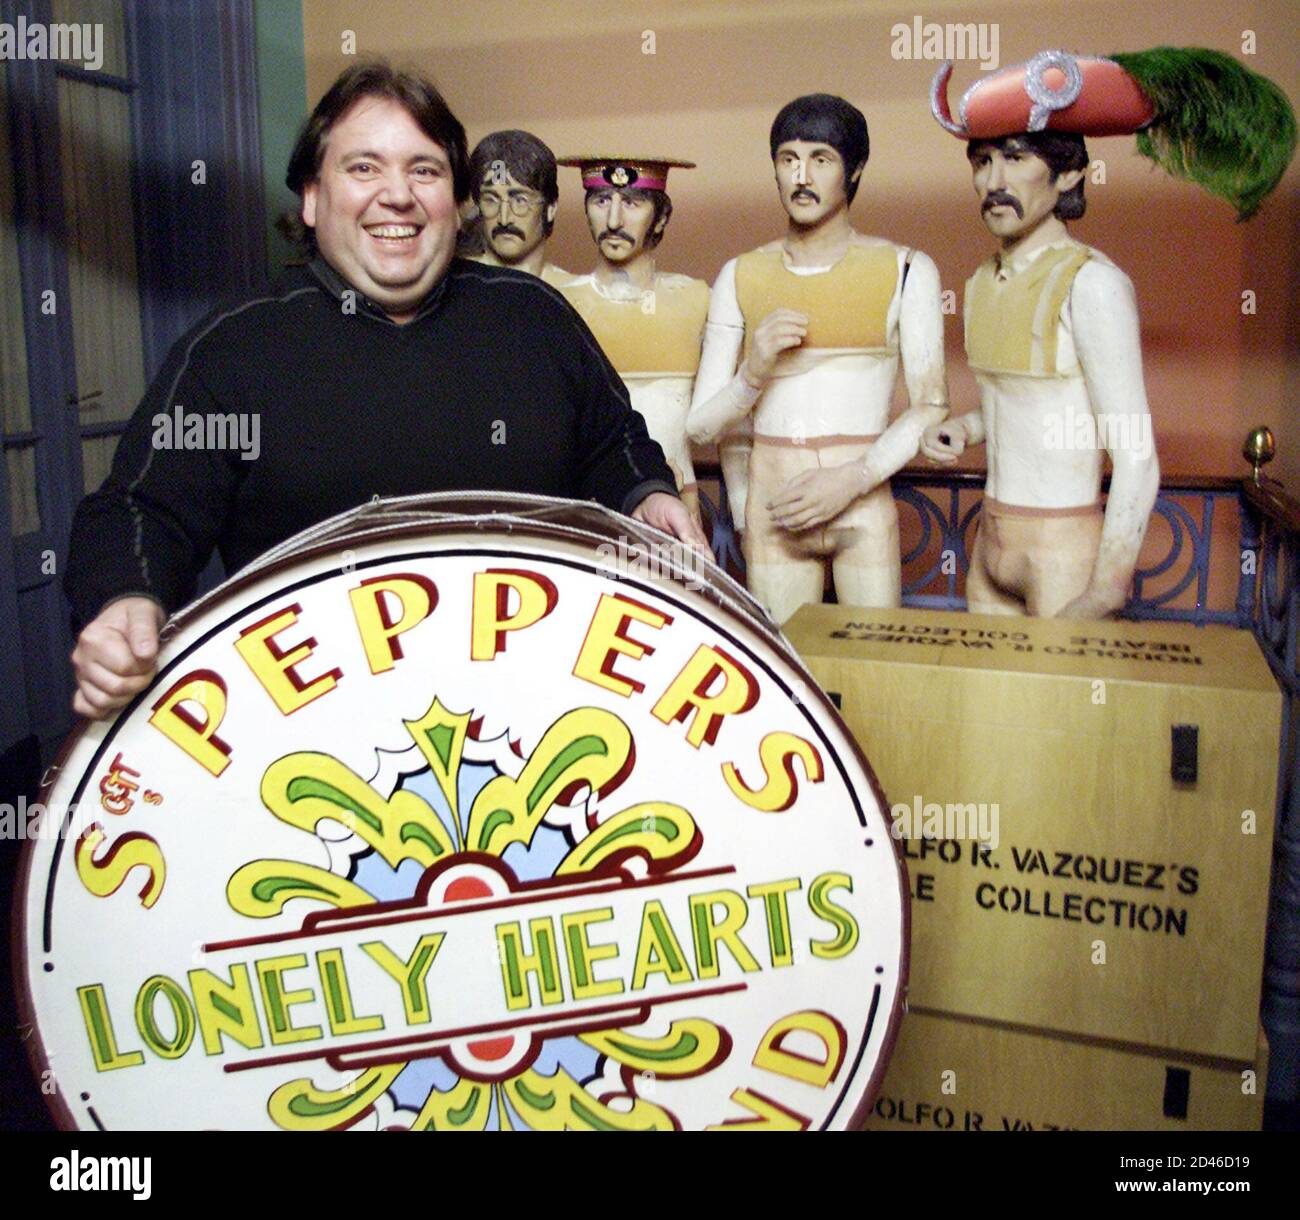 Argentine collector Rodolfo Vazquez holds a replica of the Sgt. Pepper's Lonely Hearts Club Band's bass drum in his Buenos Aires apartment where he houses most of the 5,612 items that comprise what Is recognized by the Guinness Book of World Records as the world's largest Beatles collection, October 1, 2001. The 44-year-old owner of 'The Cavern Club Buenos Aires' is about to turn another dream into reality - hosting the first ever Beatles Week festival outside Liverpool. PICTURE TAKEN OCTOBER 1. REUTERS/Rickey Rogers  RR Stock Photo